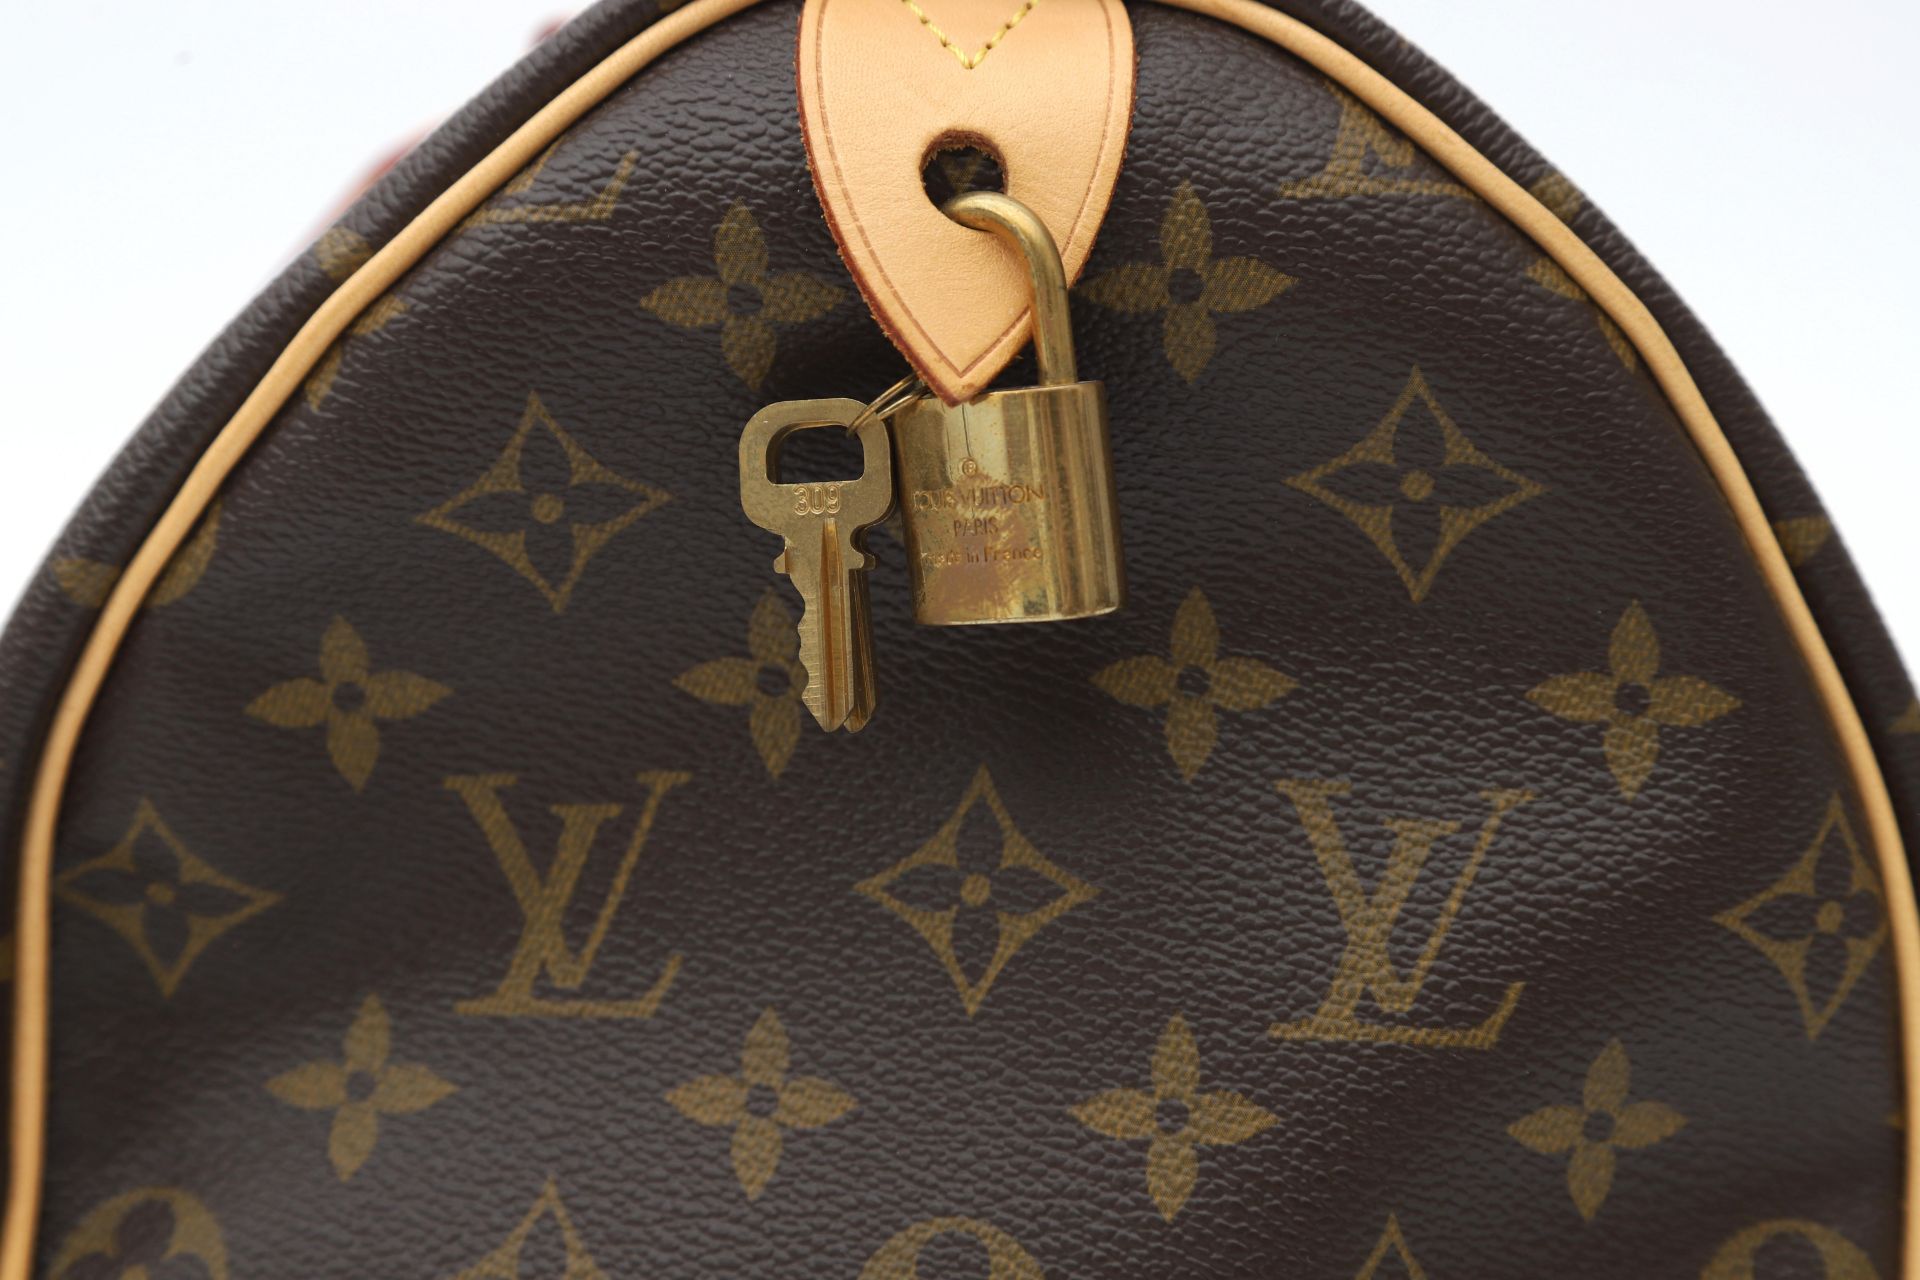 Vintage bag by Louis Vuitton model, Speedy 30 - Image 11 of 11